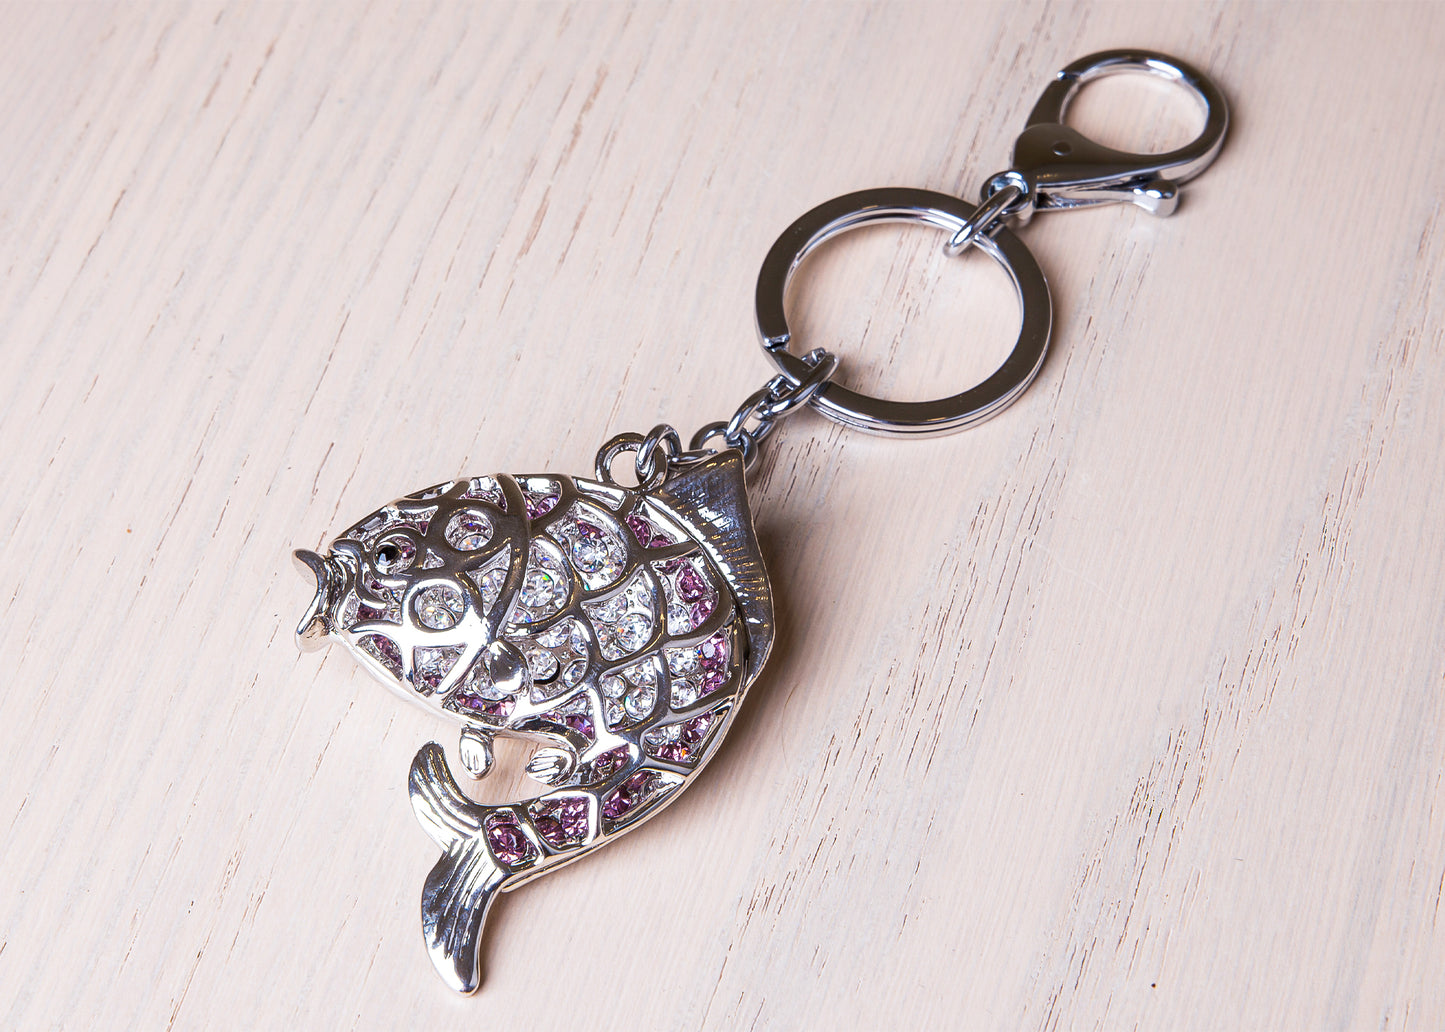 Peek A Bow Mesh Outline Cut Out Jumping Trout Fish Keychain